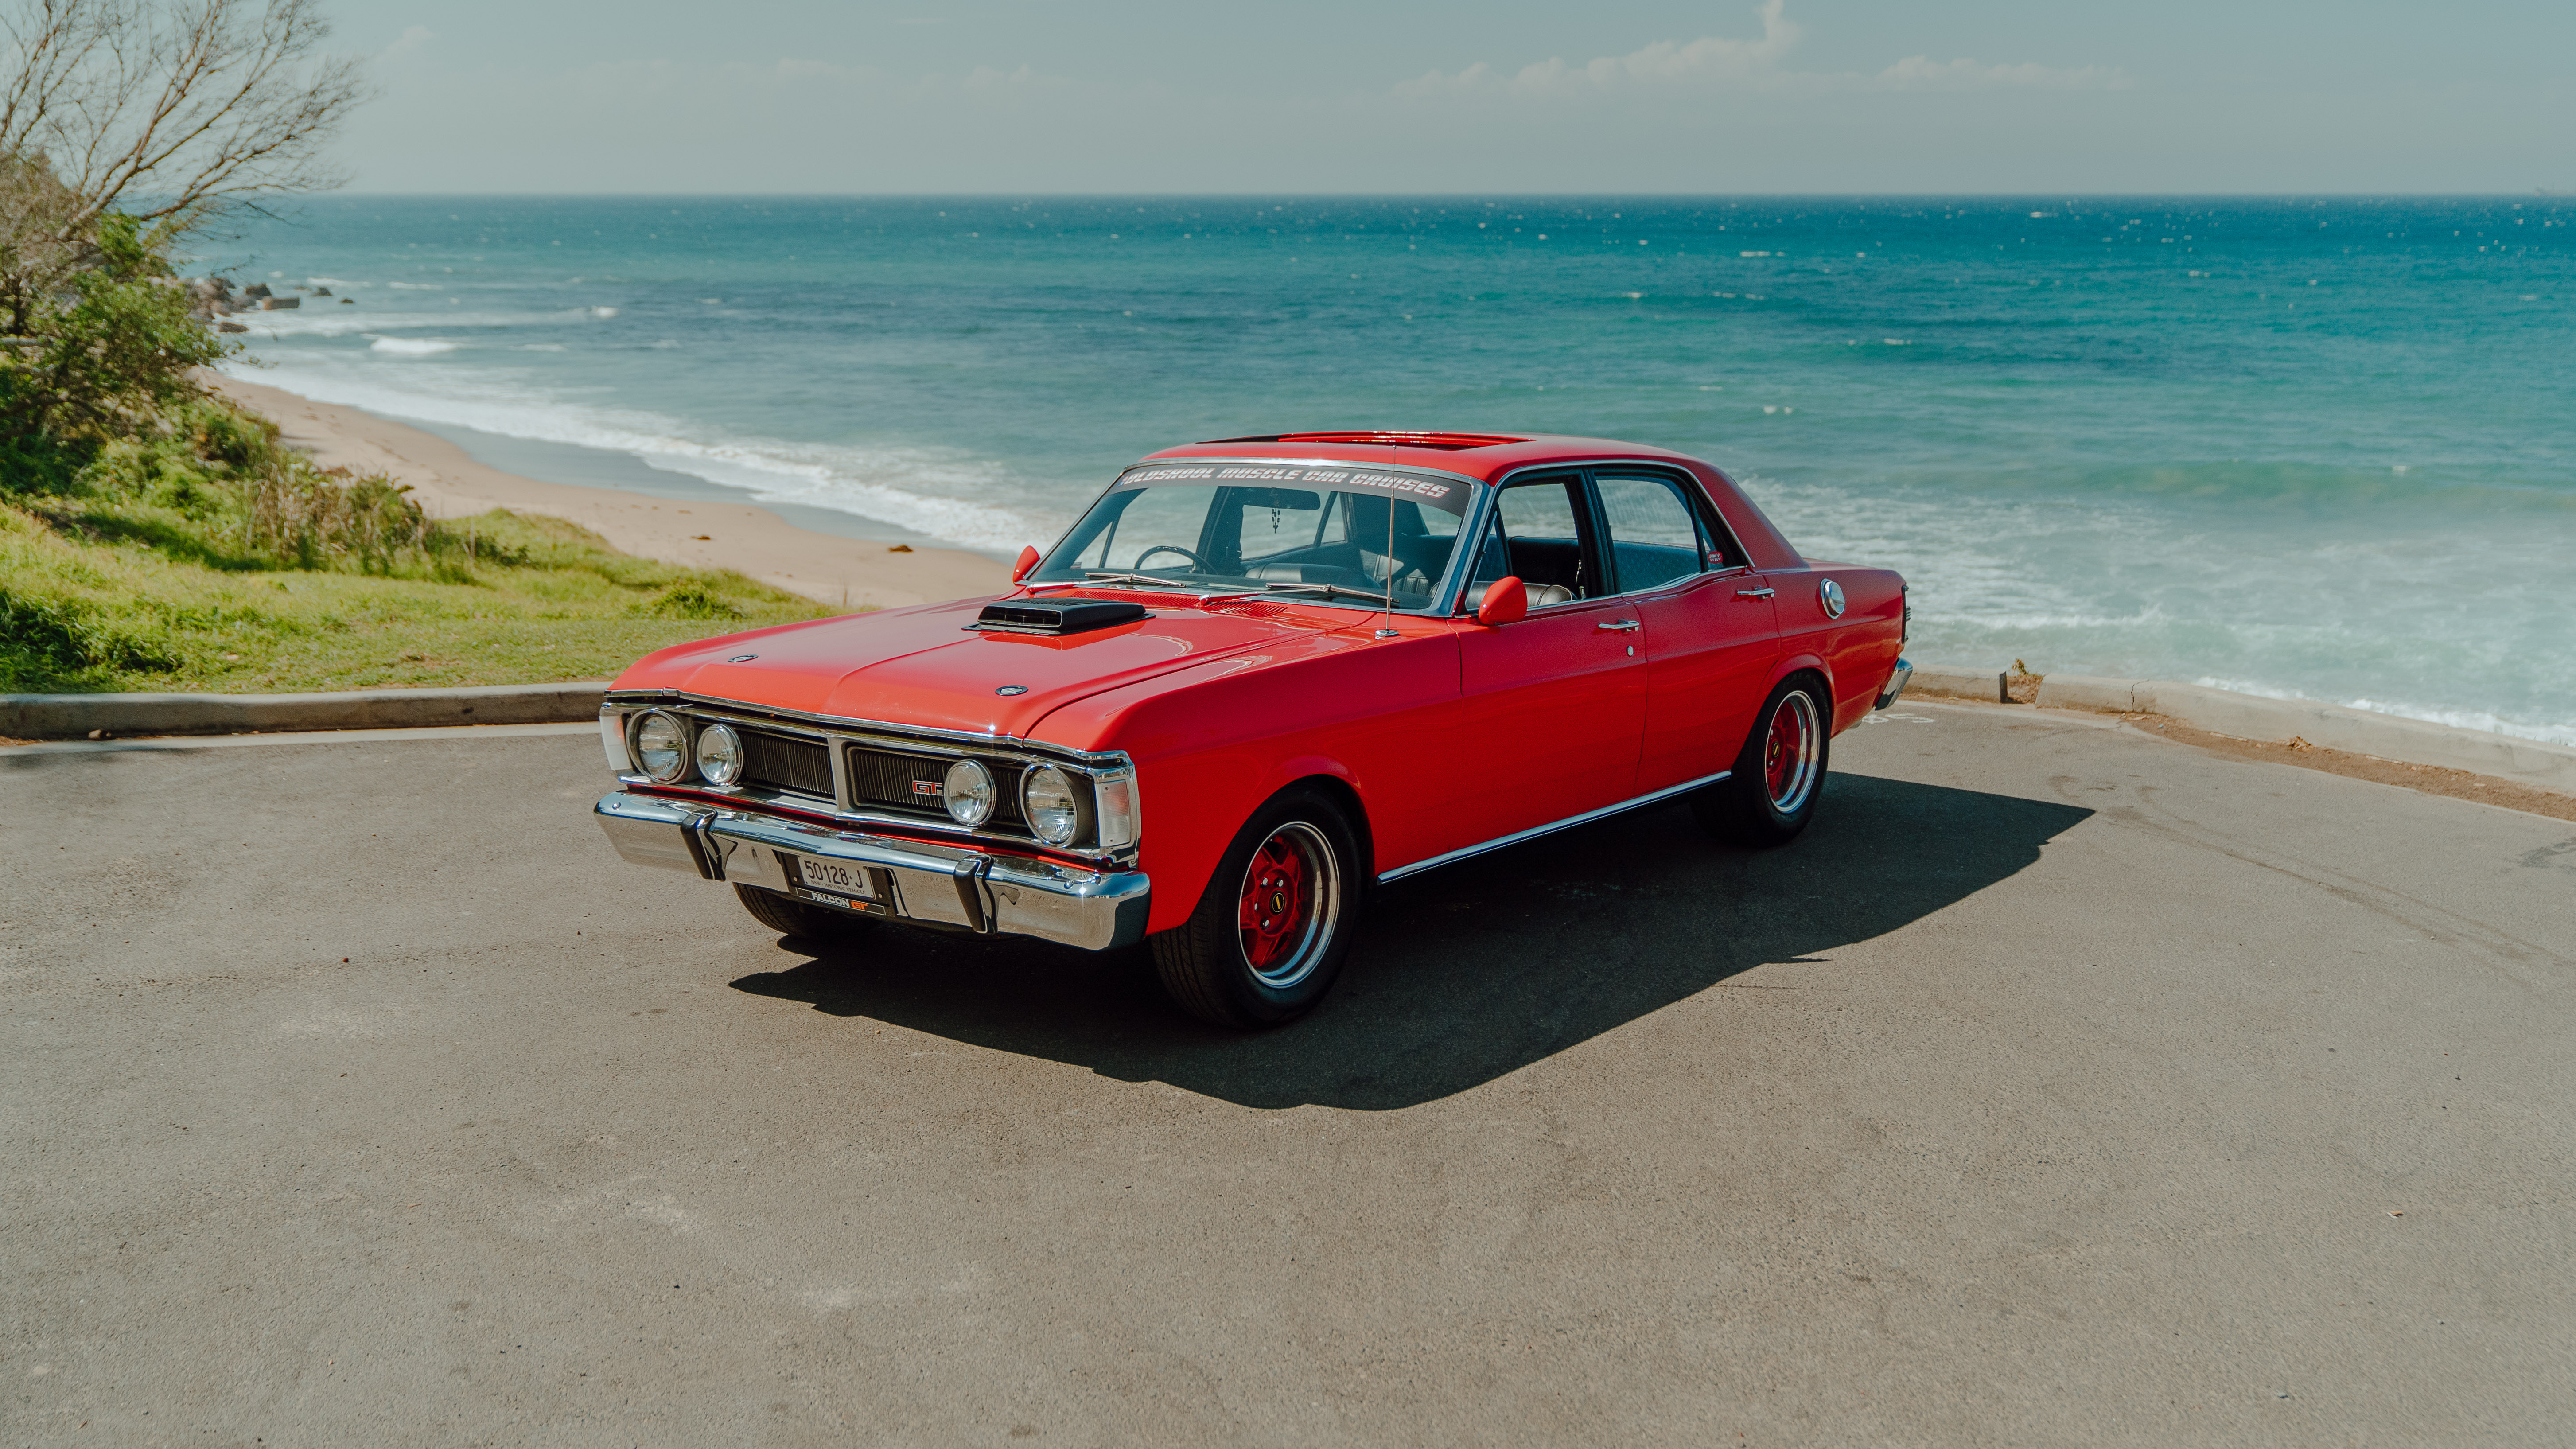 1970 Ford Falcon XY GT with shaker scoop at the beach